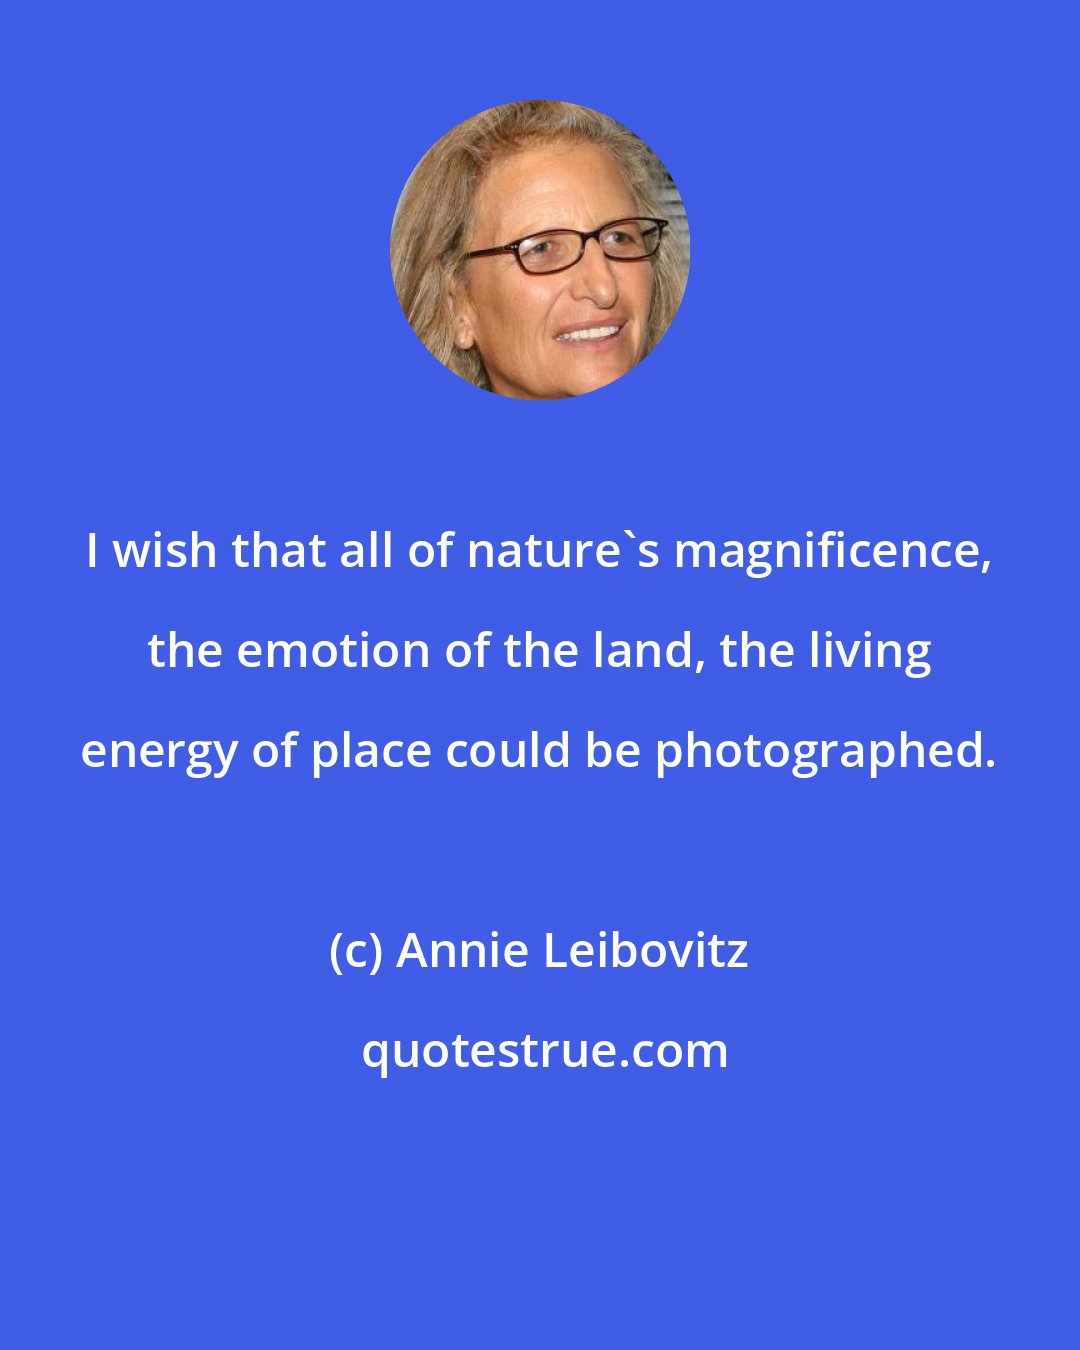 Annie Leibovitz: I wish that all of nature's magnificence, the emotion of the land, the living energy of place could be photographed.